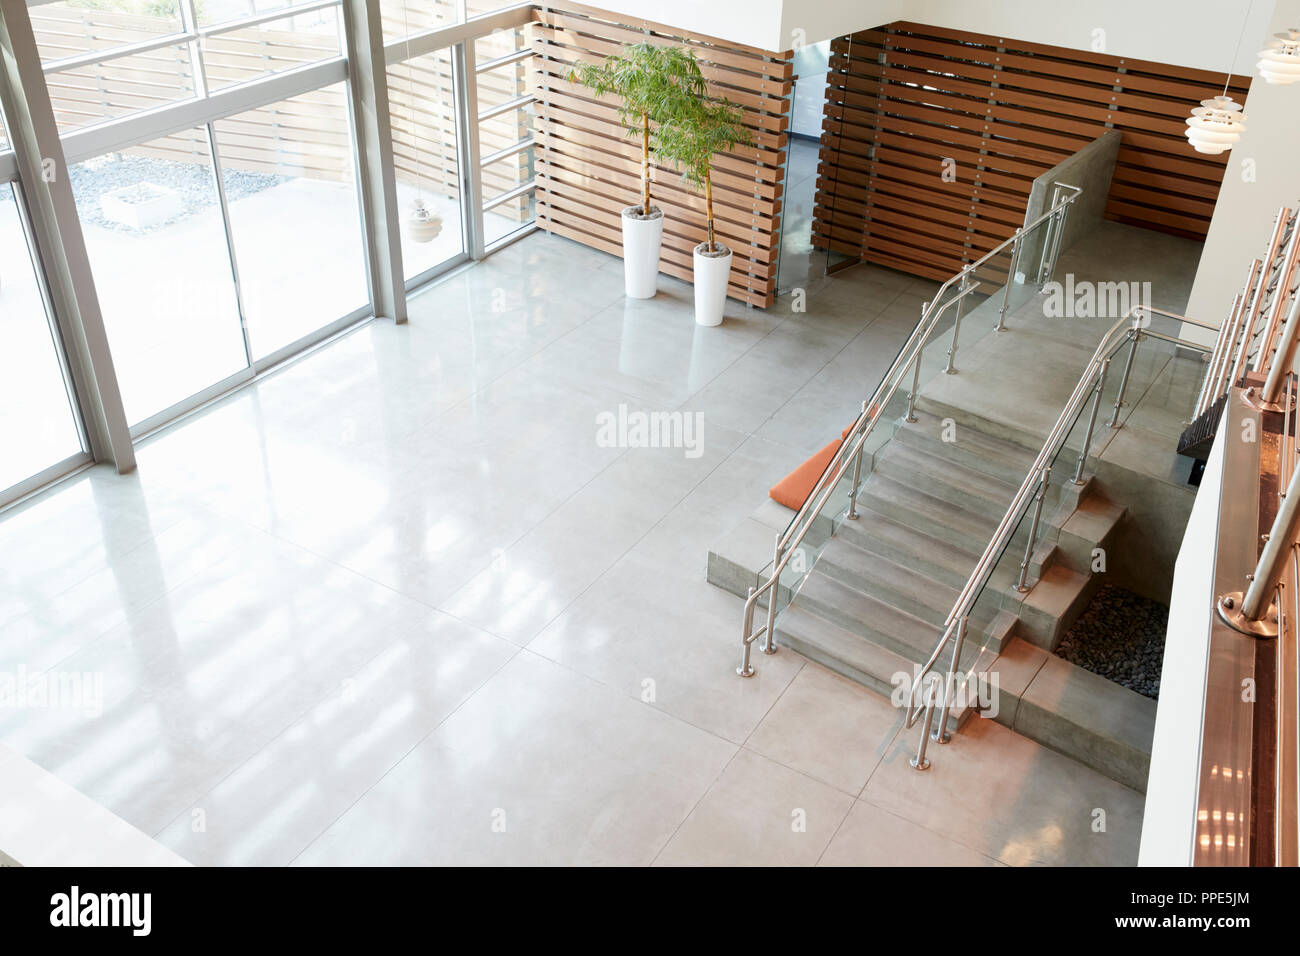 Lobby and stairs in a modern office building Stock Photo